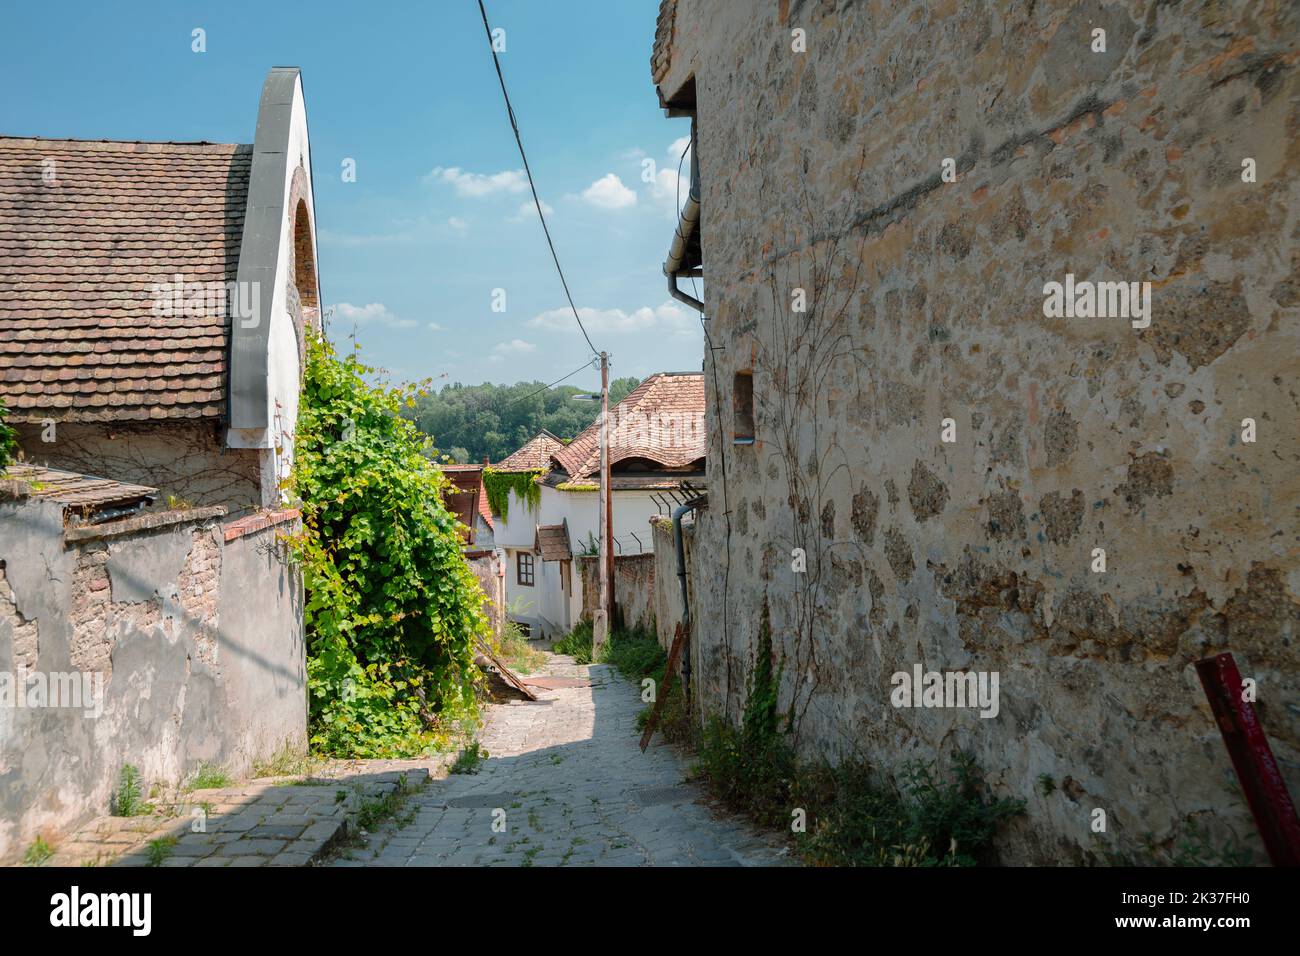 Szentendre old town countryside village in Hungary Stock Photo